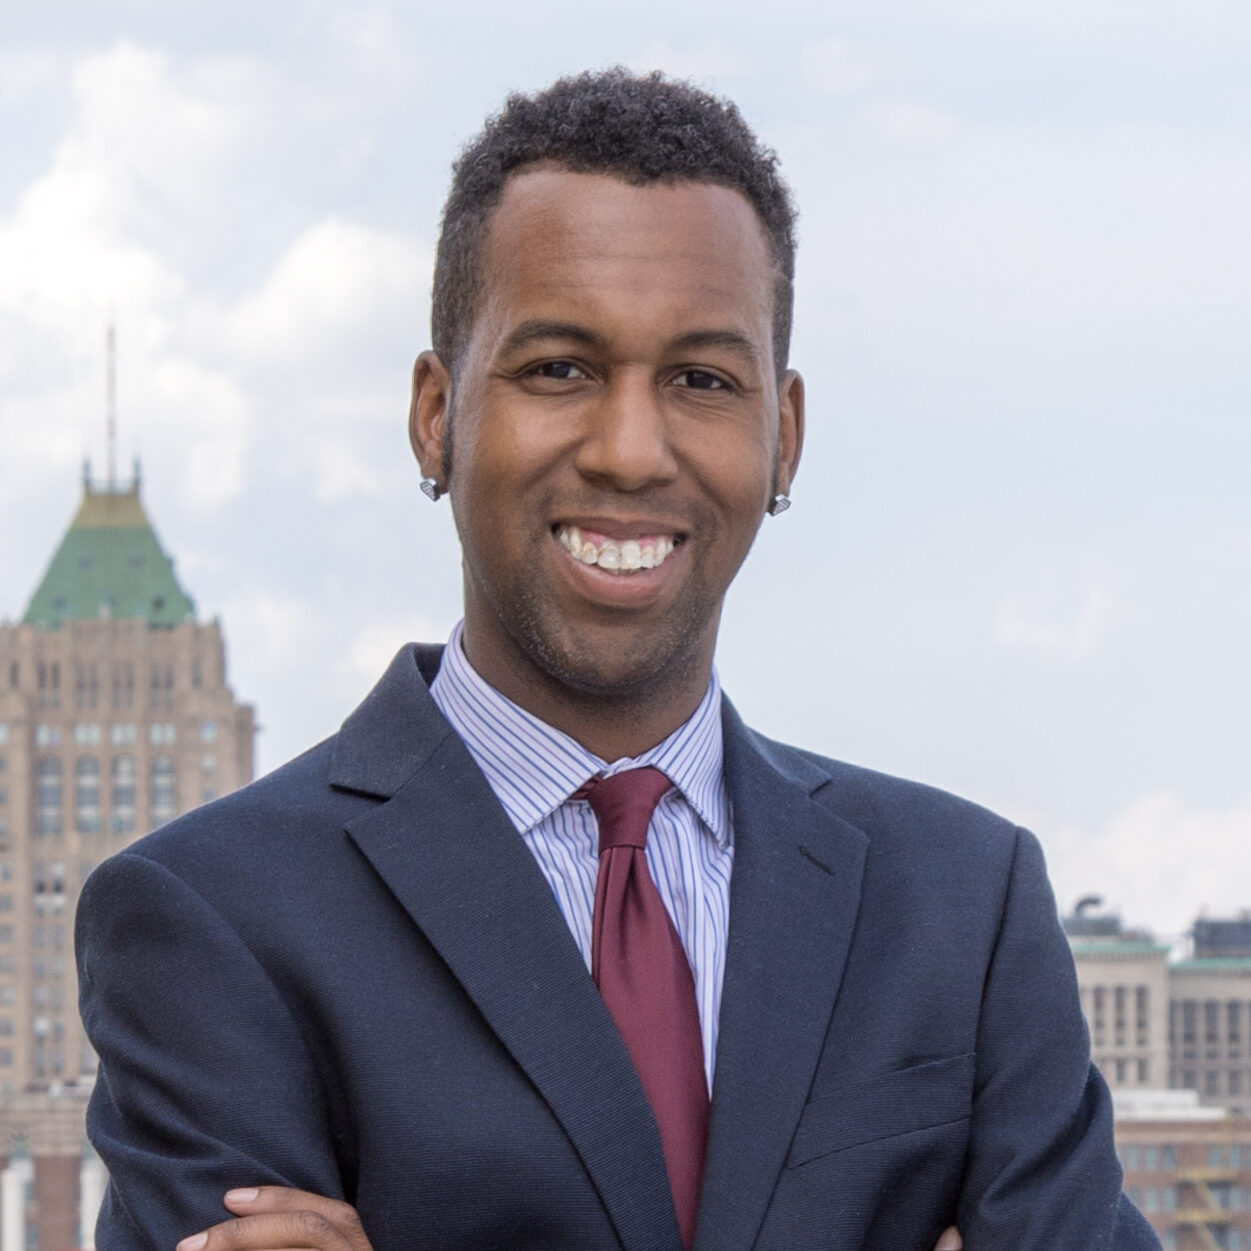 Michigan LCV Voting Rights Coordinator Roland Leggett smiling at the camera on a roof in Midtown, Detroit. He is a queer man of color wearing a suit.